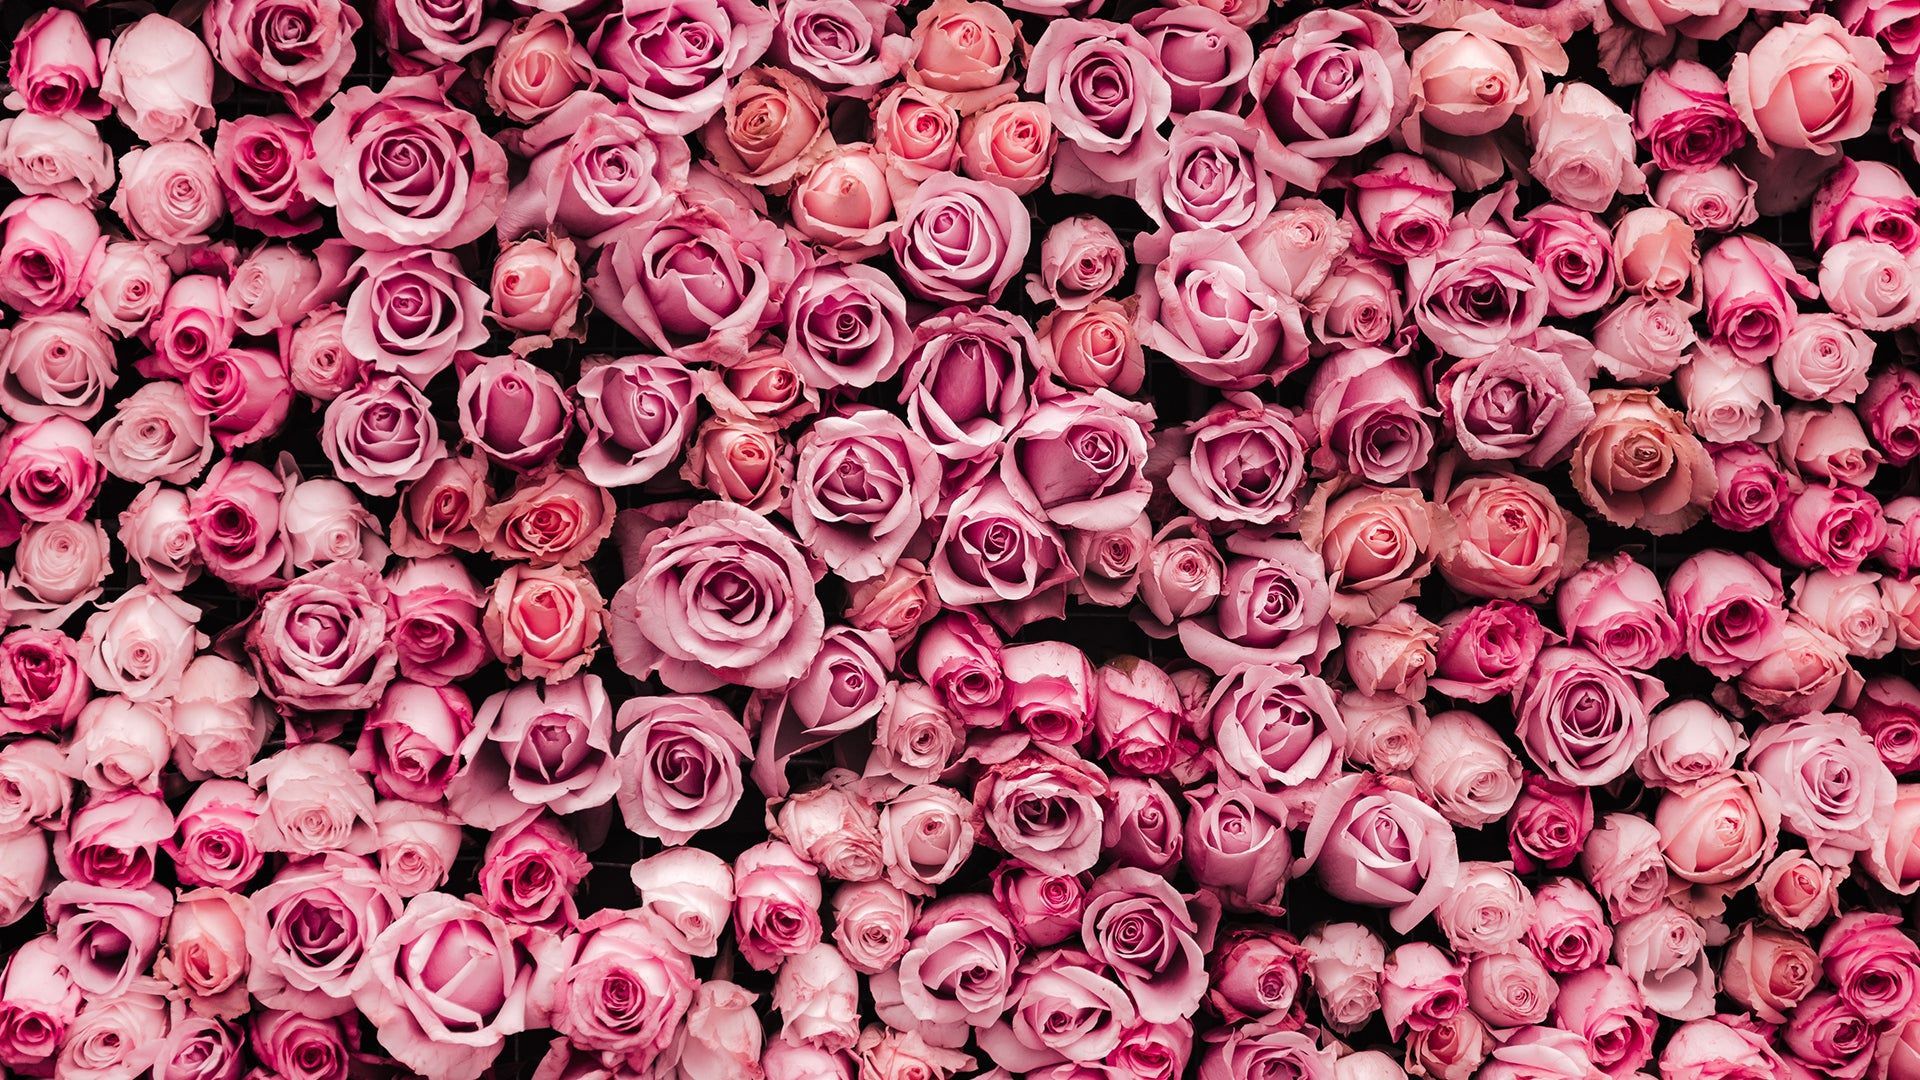 A wall of pink roses. - Roses, Valentine's Day